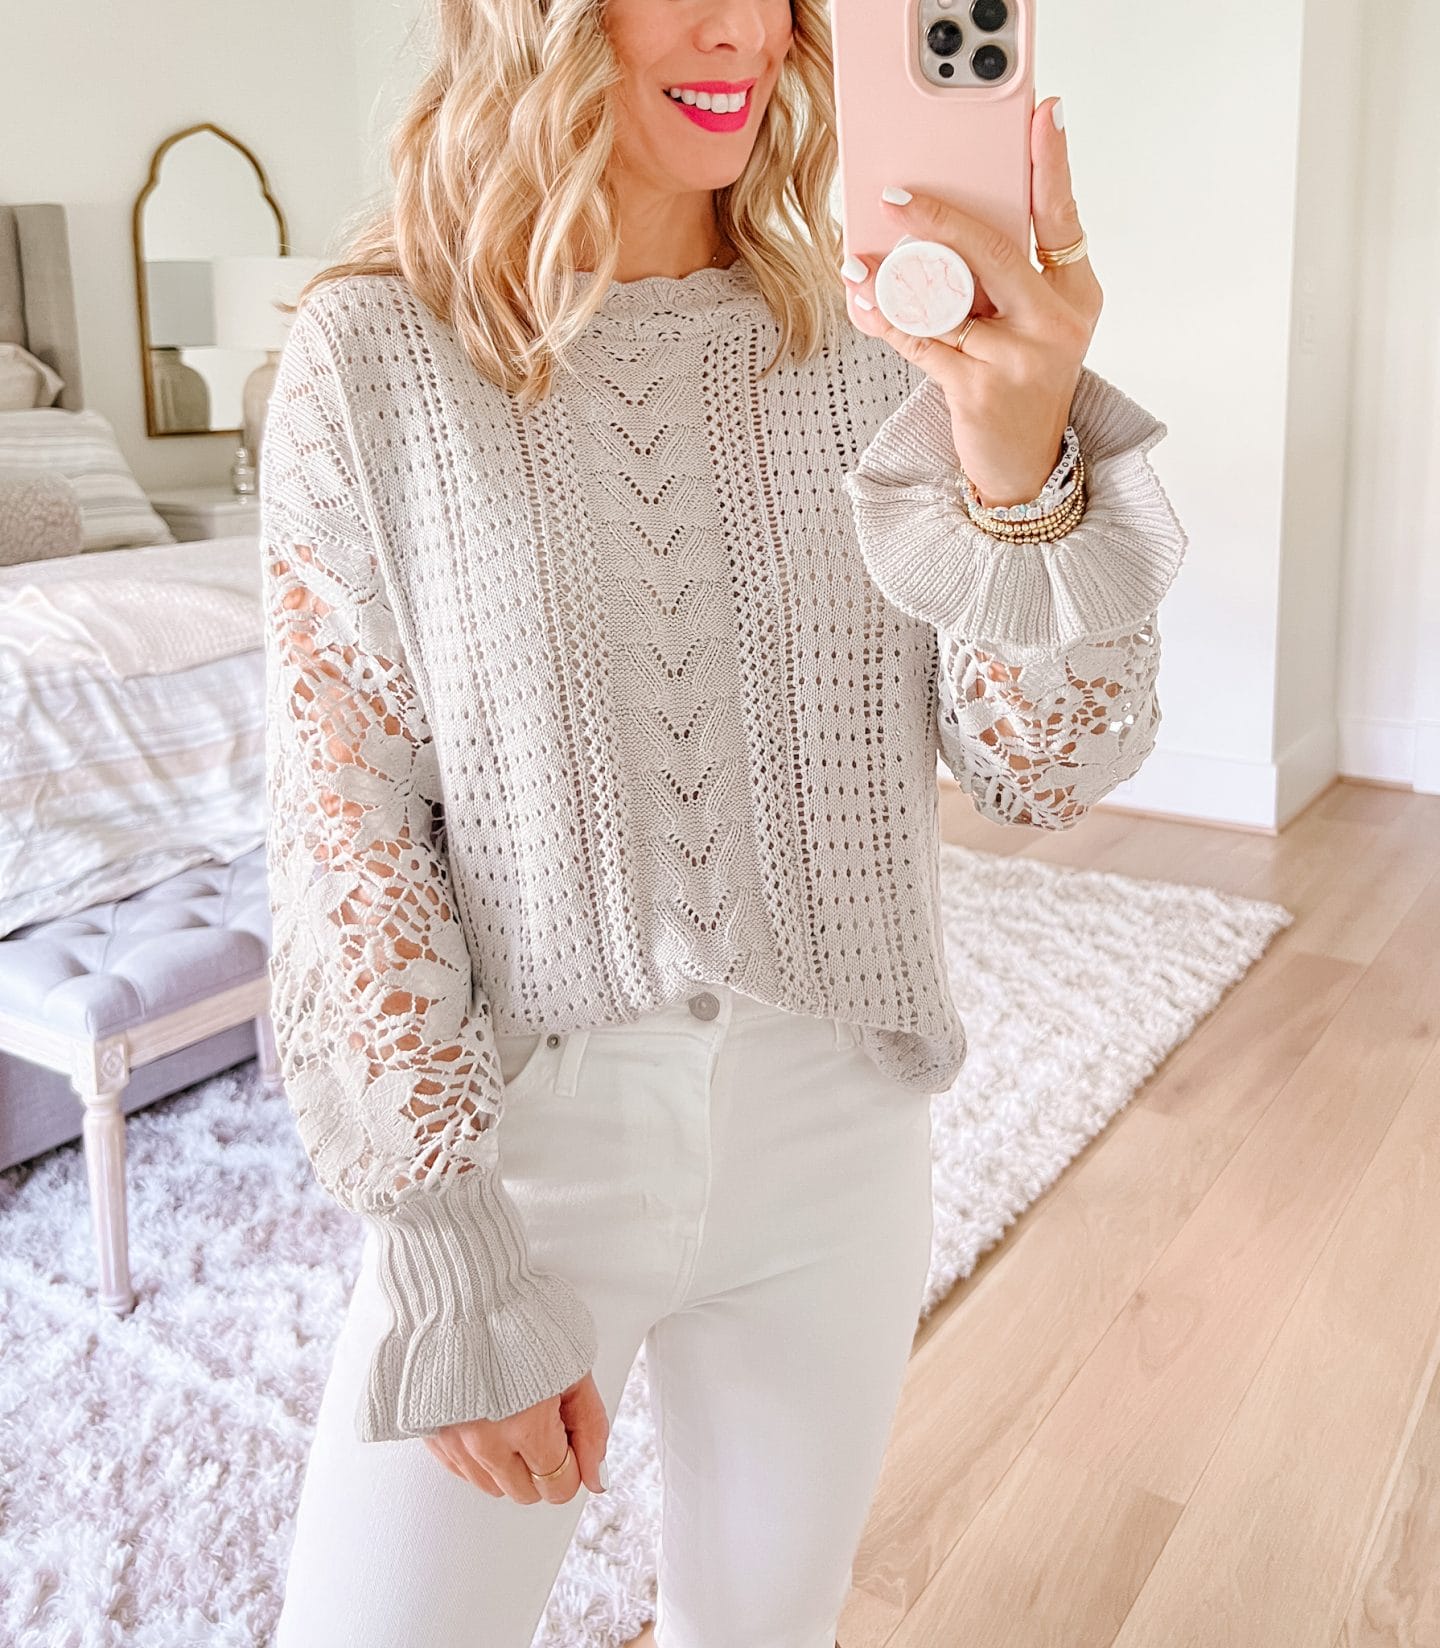 Lace Sleeved Sweater, Jeans, Boots 